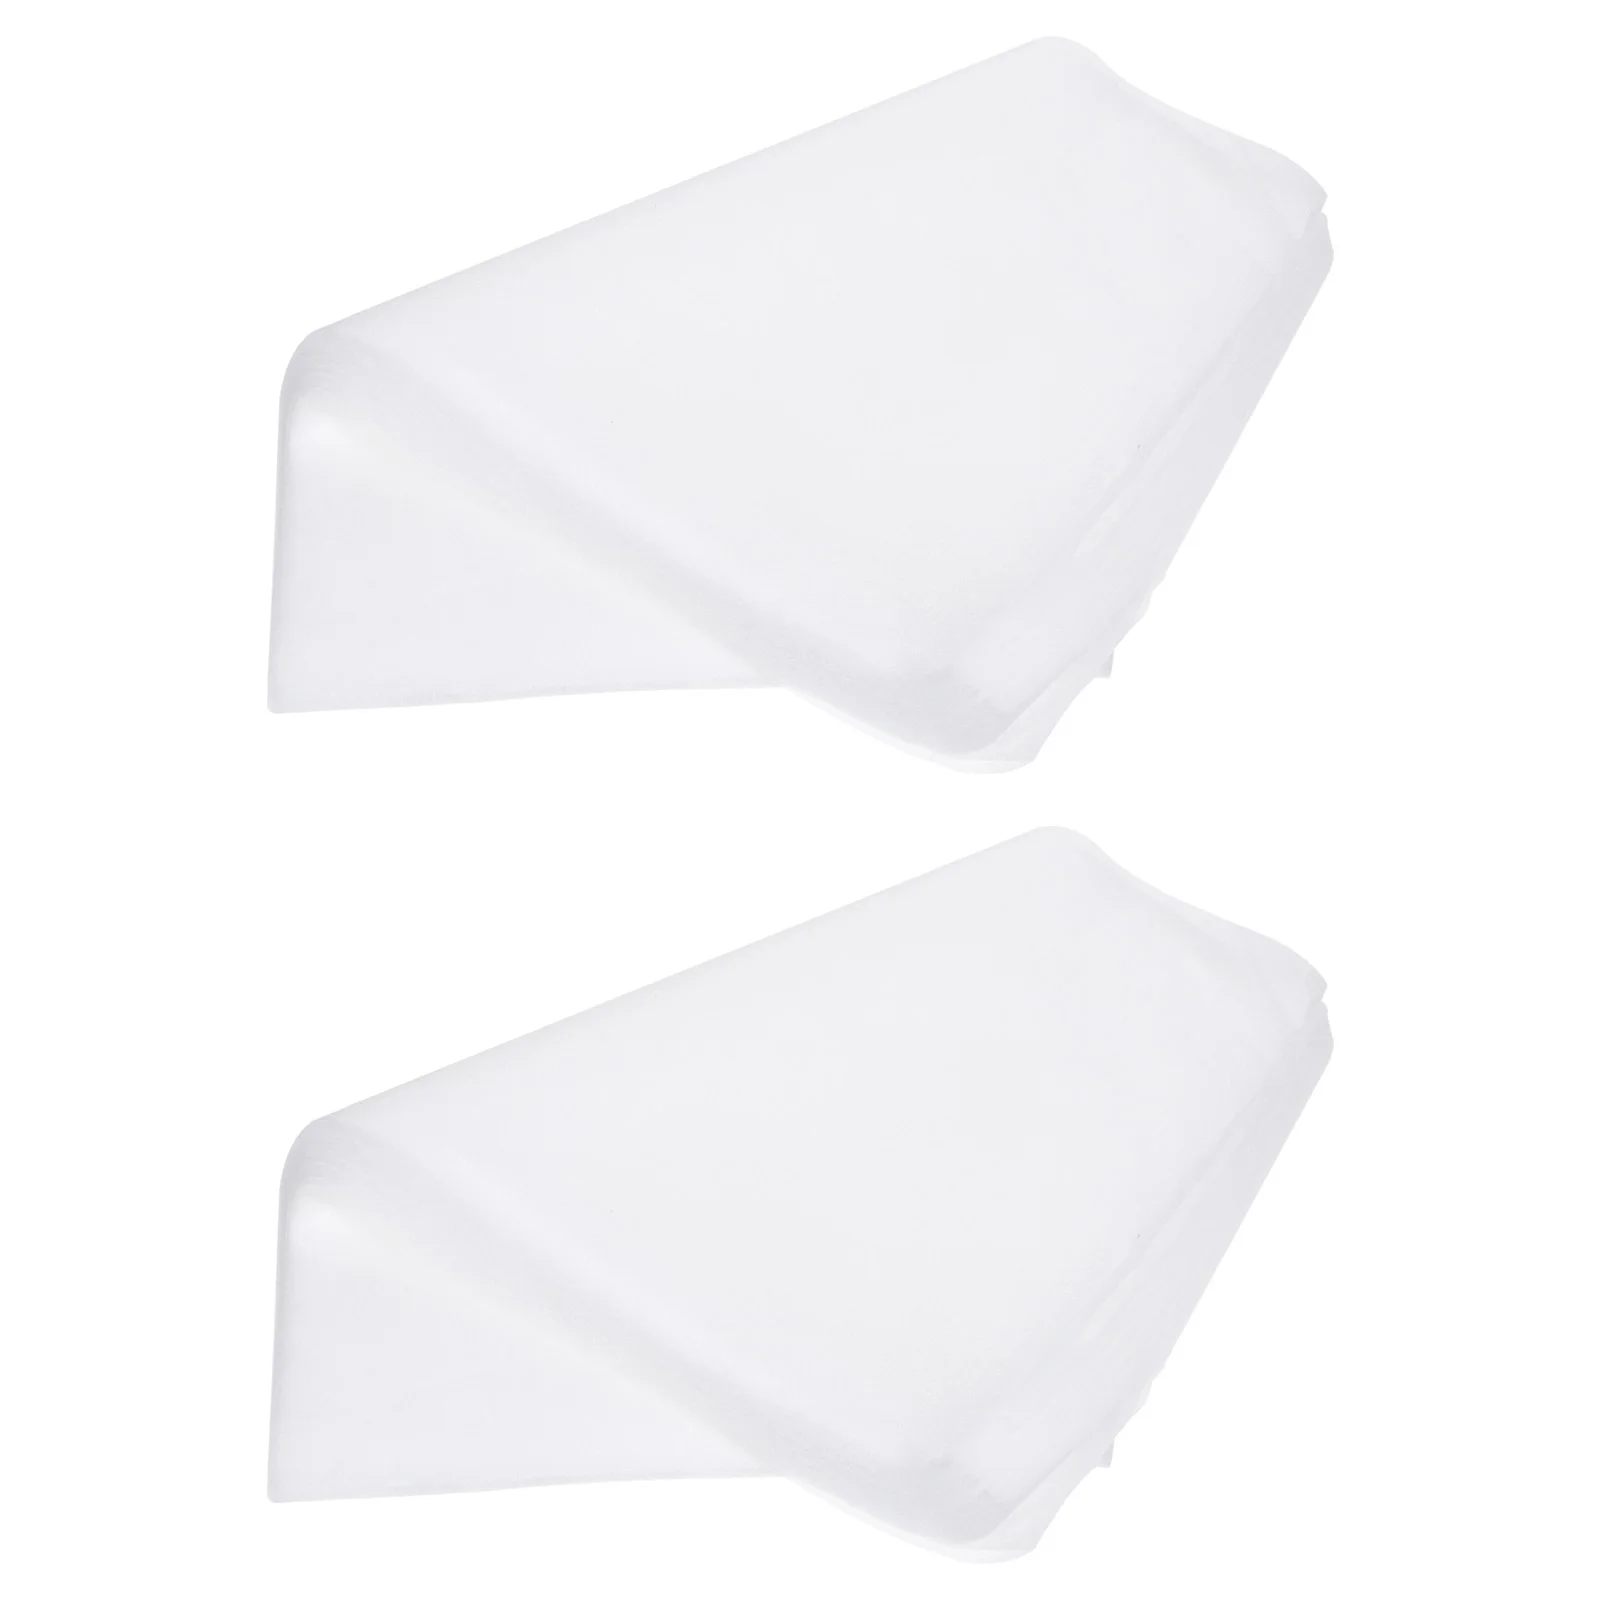 

200 Pcs Urine Pad Newborn Mat Disposable Bed Cushion Hygienic Nappy Changing Toddler Bedding Baby Cot Infant Urinal Diaper